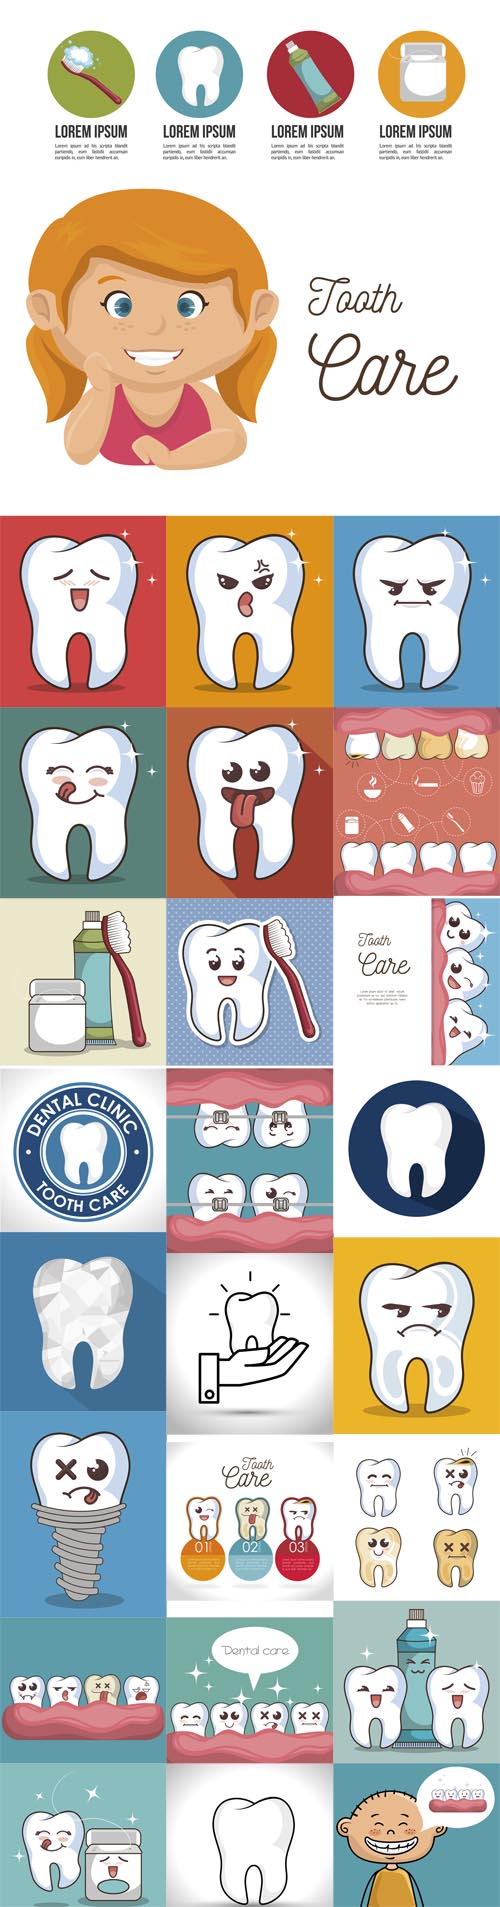 Human Tooth Character Icon Vector Illustration Graphic